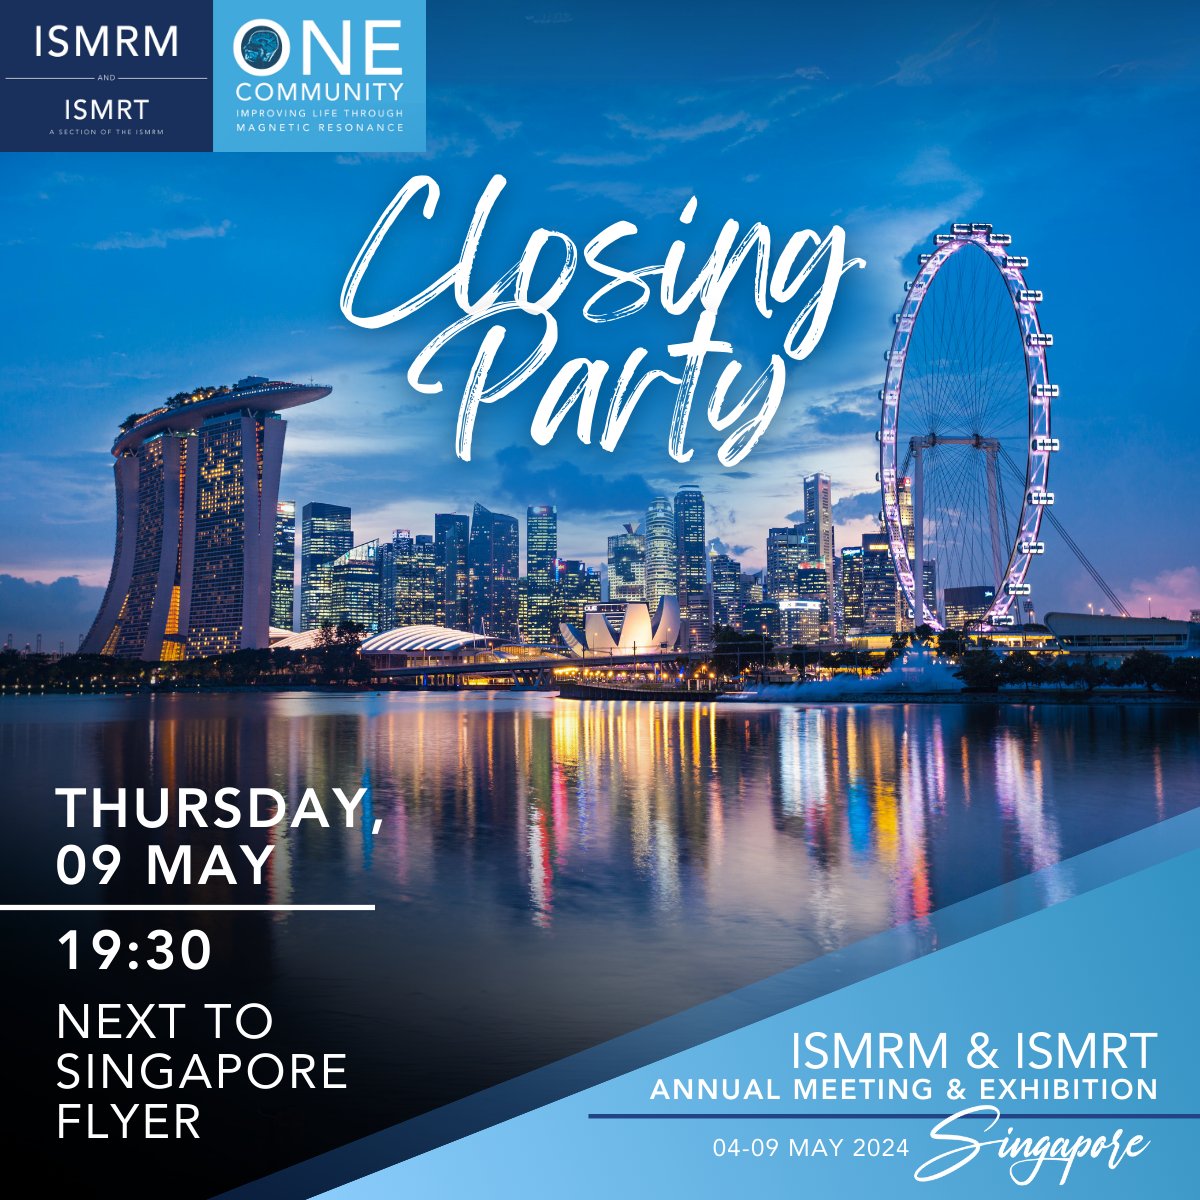 Let’s celebrate together at the CLOSING PARTY! The Closing Party will be at Bay Central, next to the Singapore Flyer, at 19:30. See you there! #ISMRT2024 #ISMRM2024 #ISMRT #ISMRM #MRI #MR #MagneticResonance #Singapore